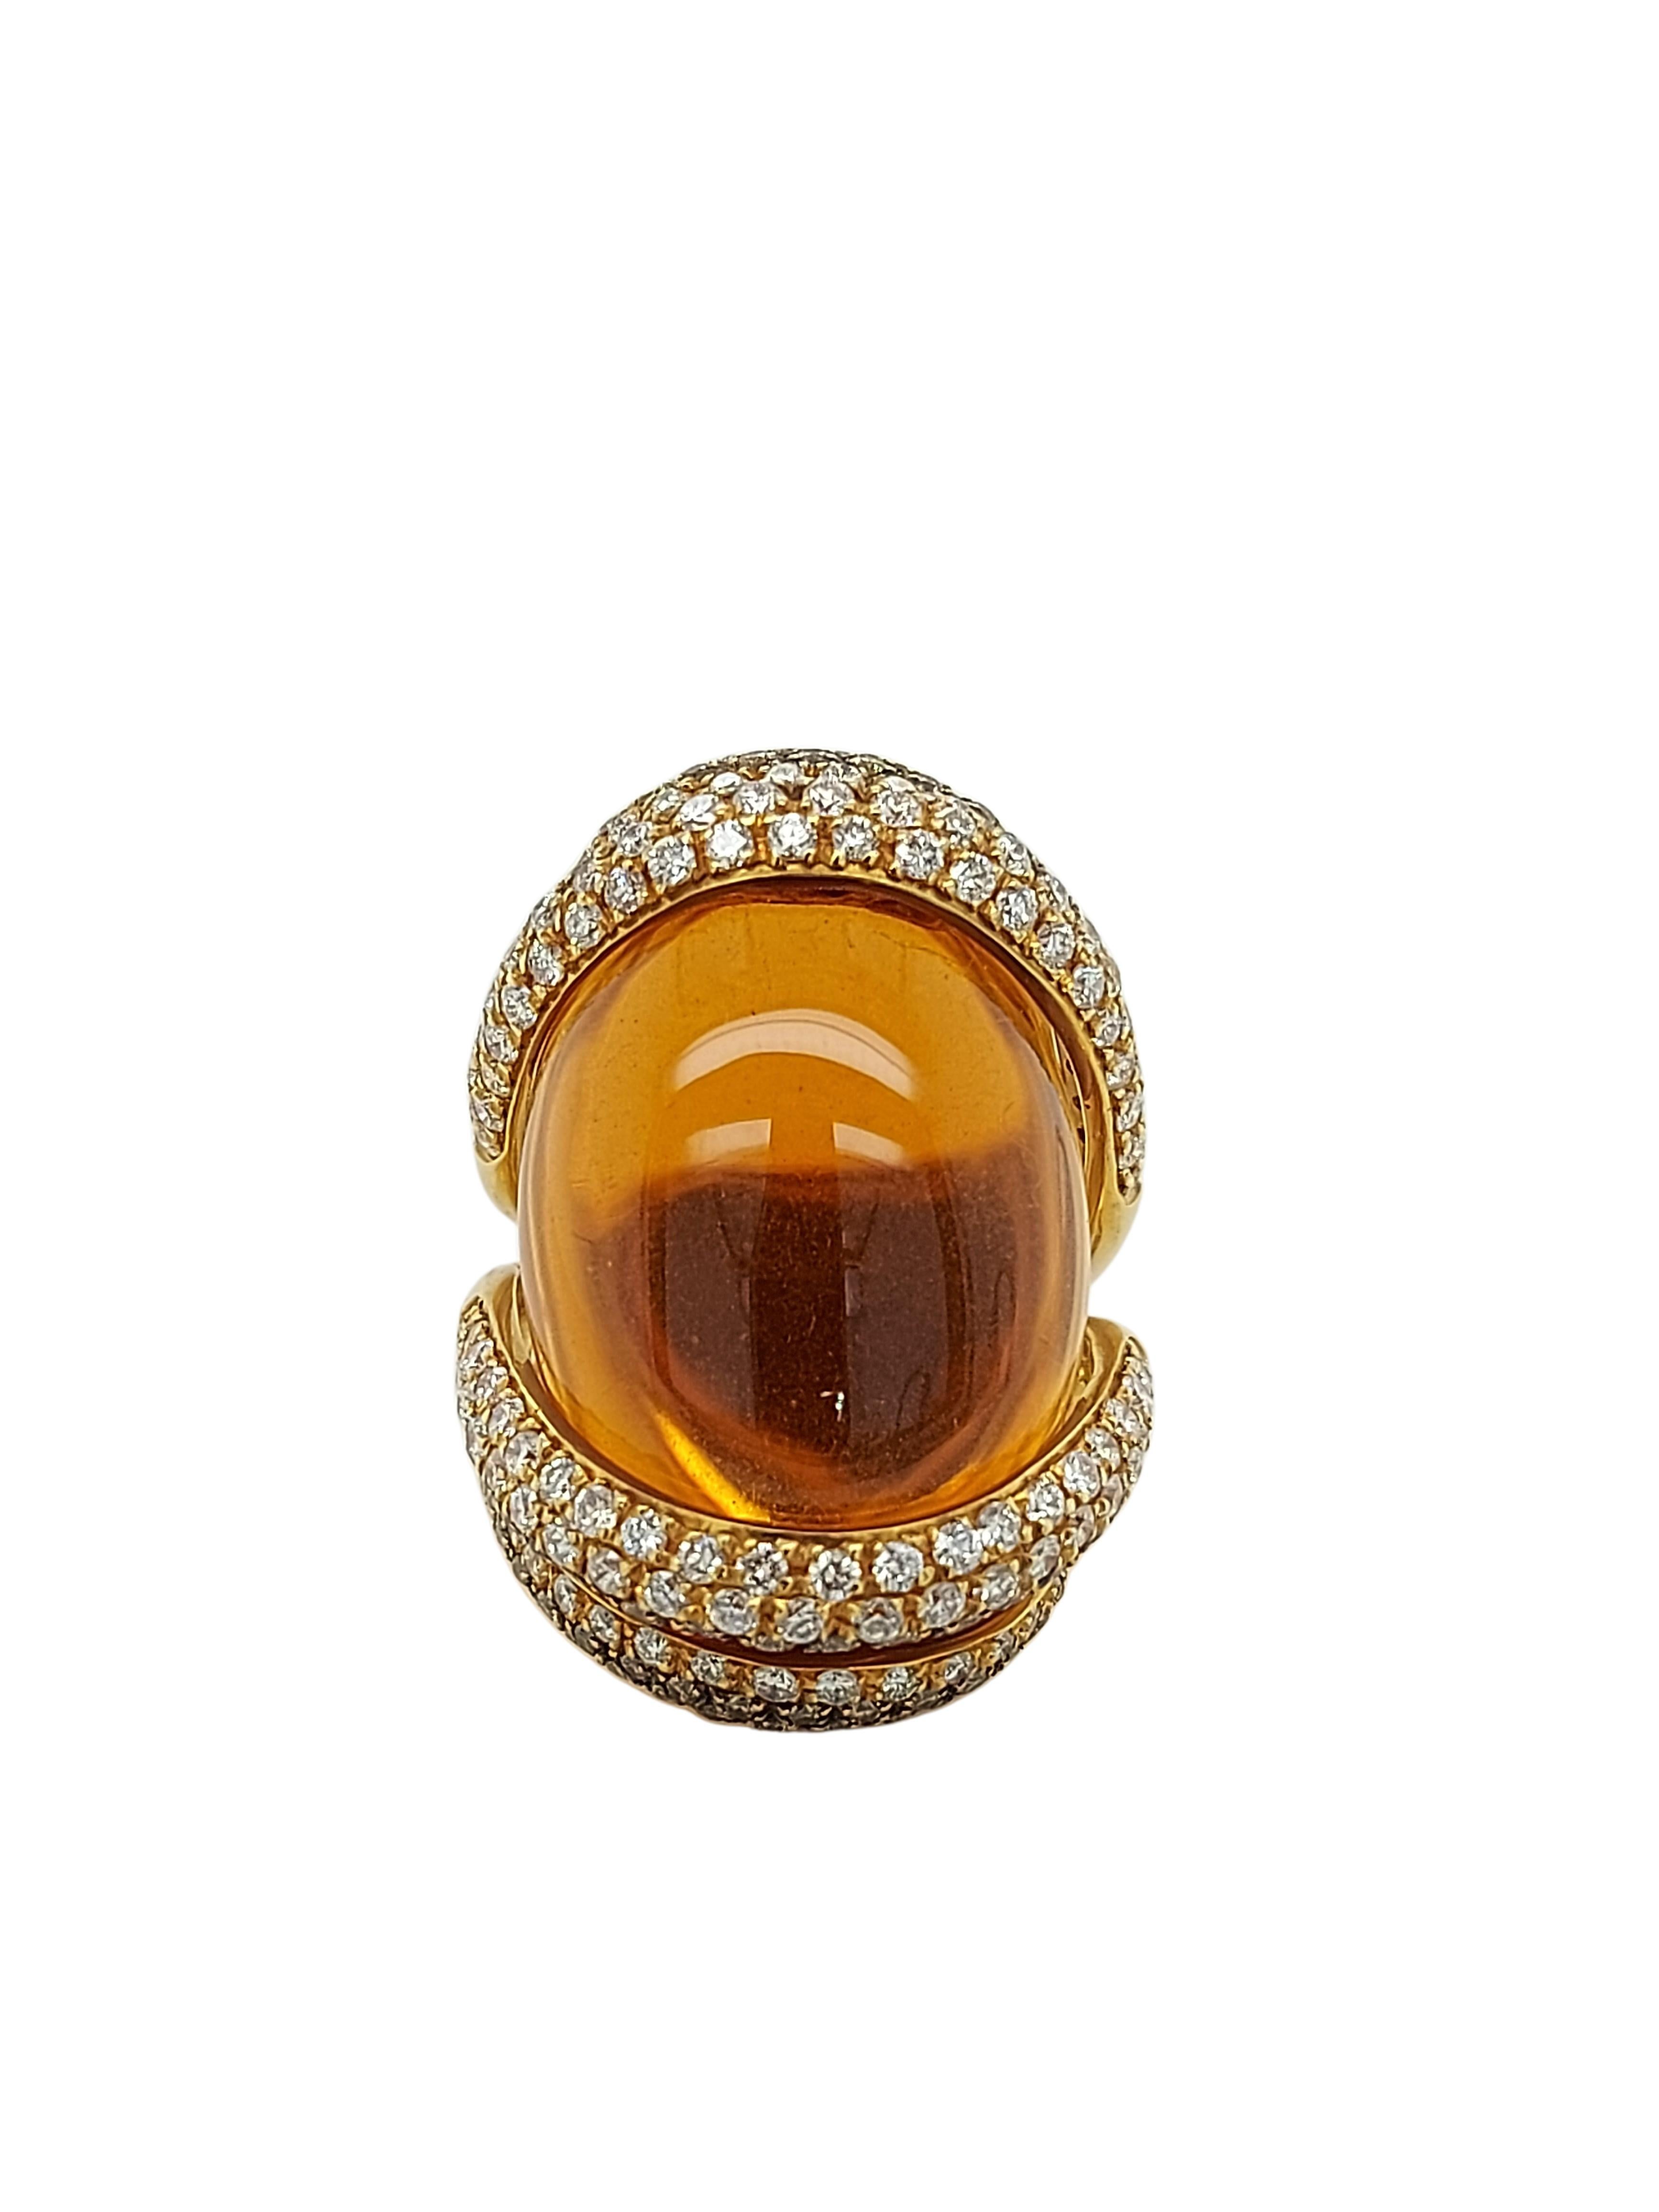 Magnificent Pink Gold Ring With Beautiful Huge Natural Cabochon Citrine And Diamonds 

Diamonds: White brilliant cut diamonds together approx. 1.56Ct G SI, brown diamonds together ca. 1.05 Ct

Natural Citrine: 34 Ct

Material: 18kt yellow